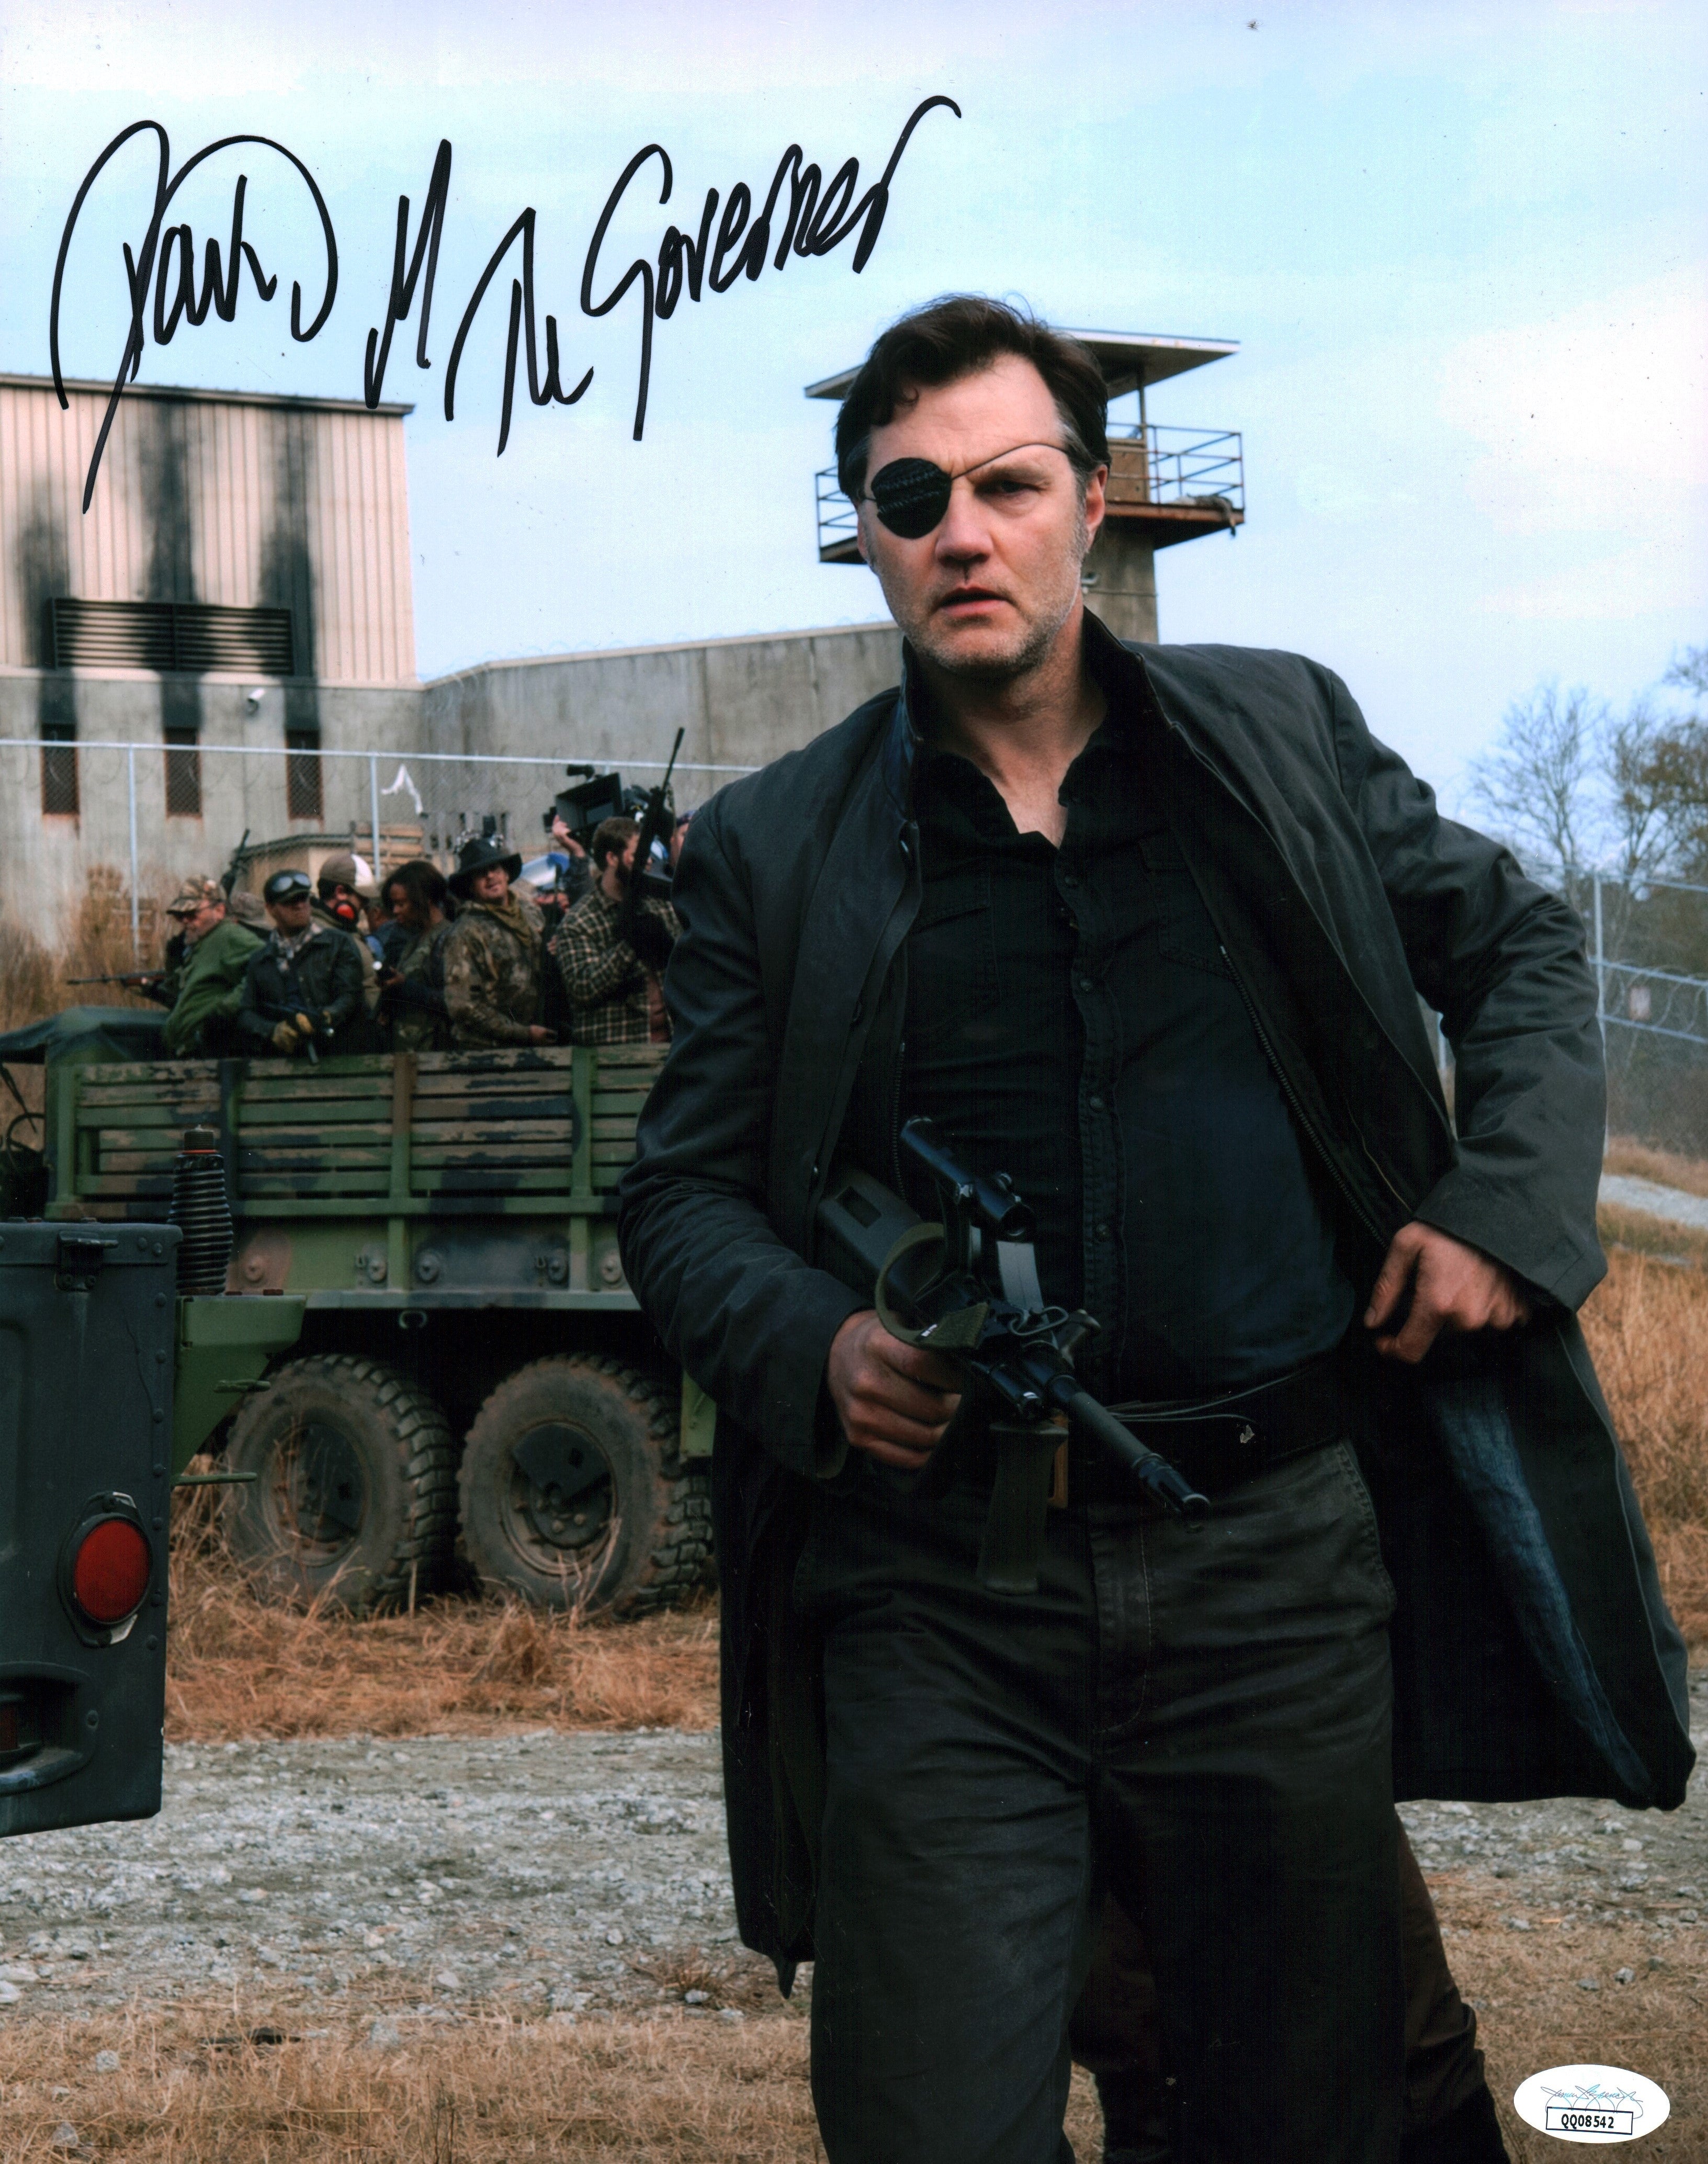 David Morrissey The Walking Dead 11x14 Photo Poster Signed Autographed JSA COA Certified